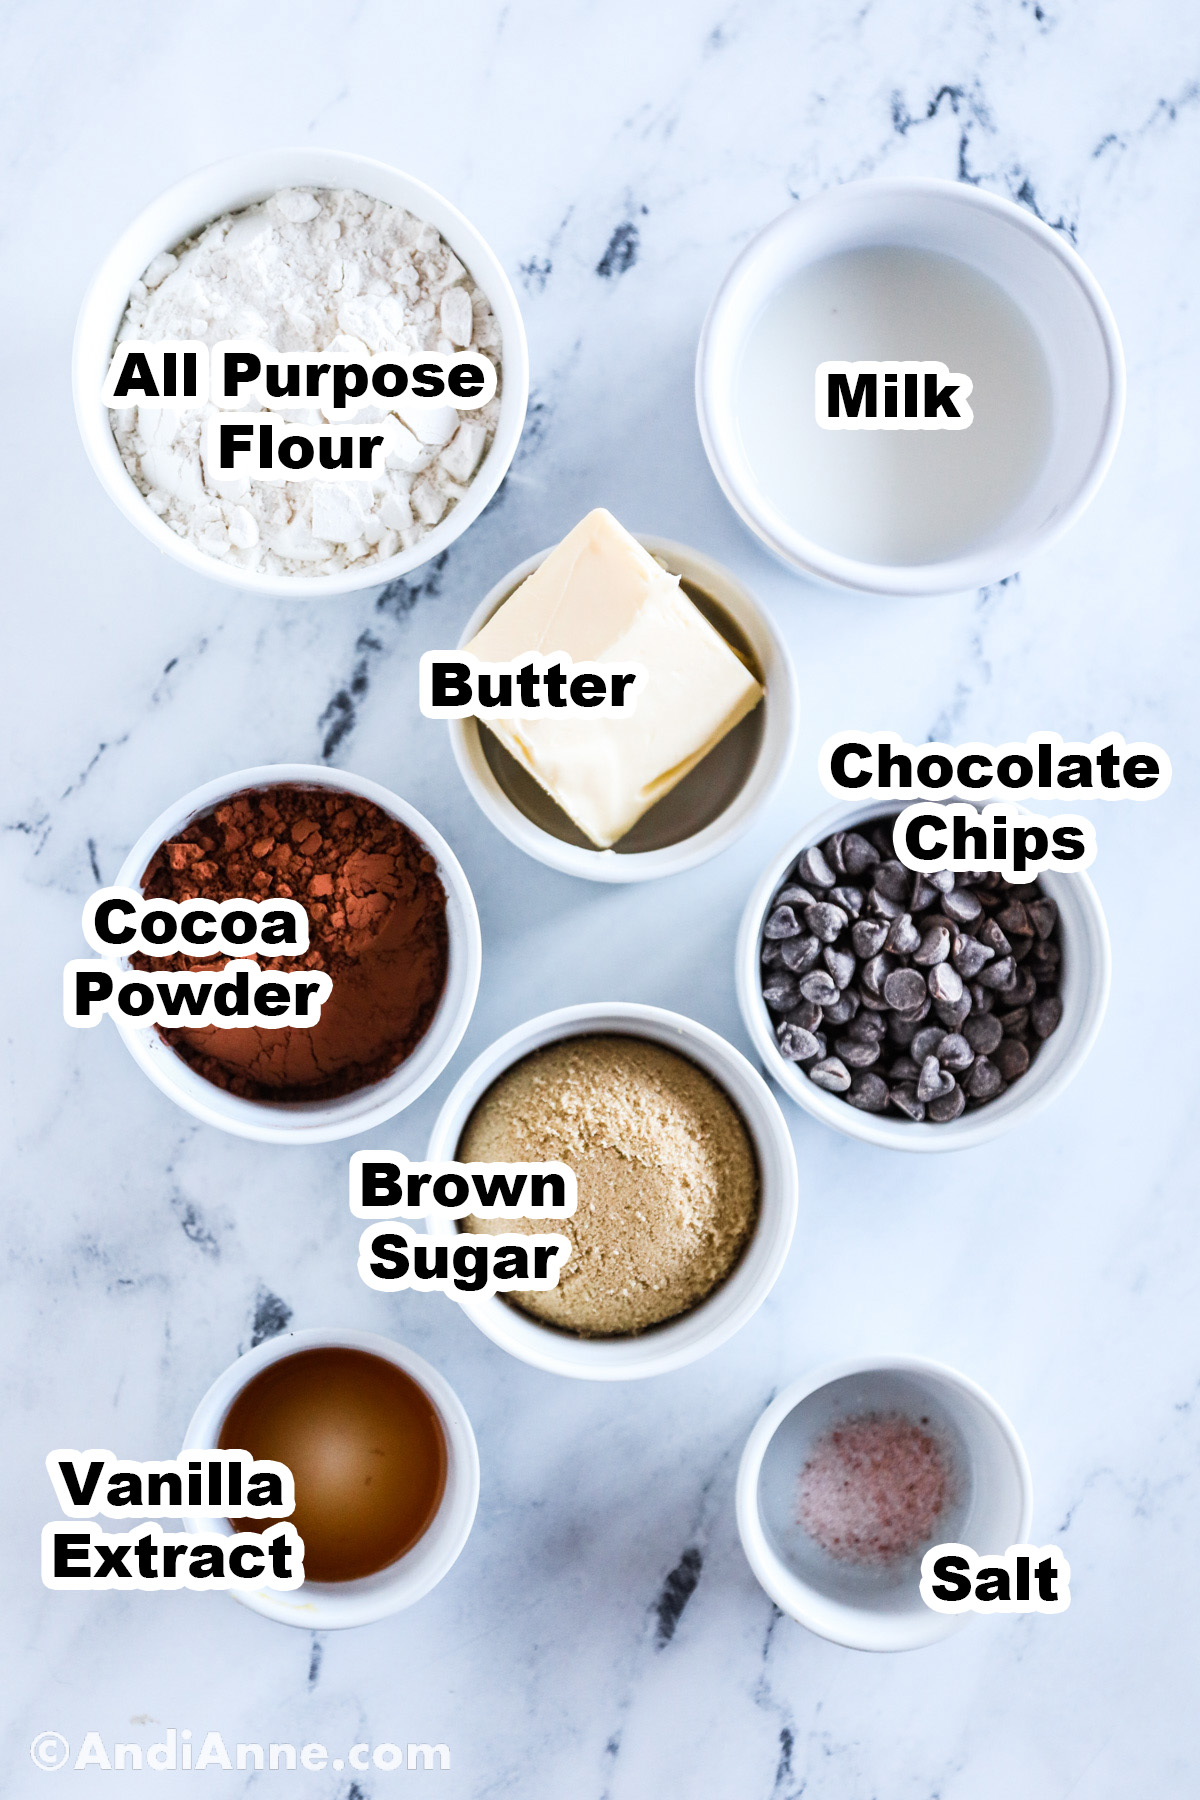 Recipe ingredients on the counter including bowls of flour, milk, butter, cocoa powder, brown sugar, chocolate chips, vanilla extract and salt.